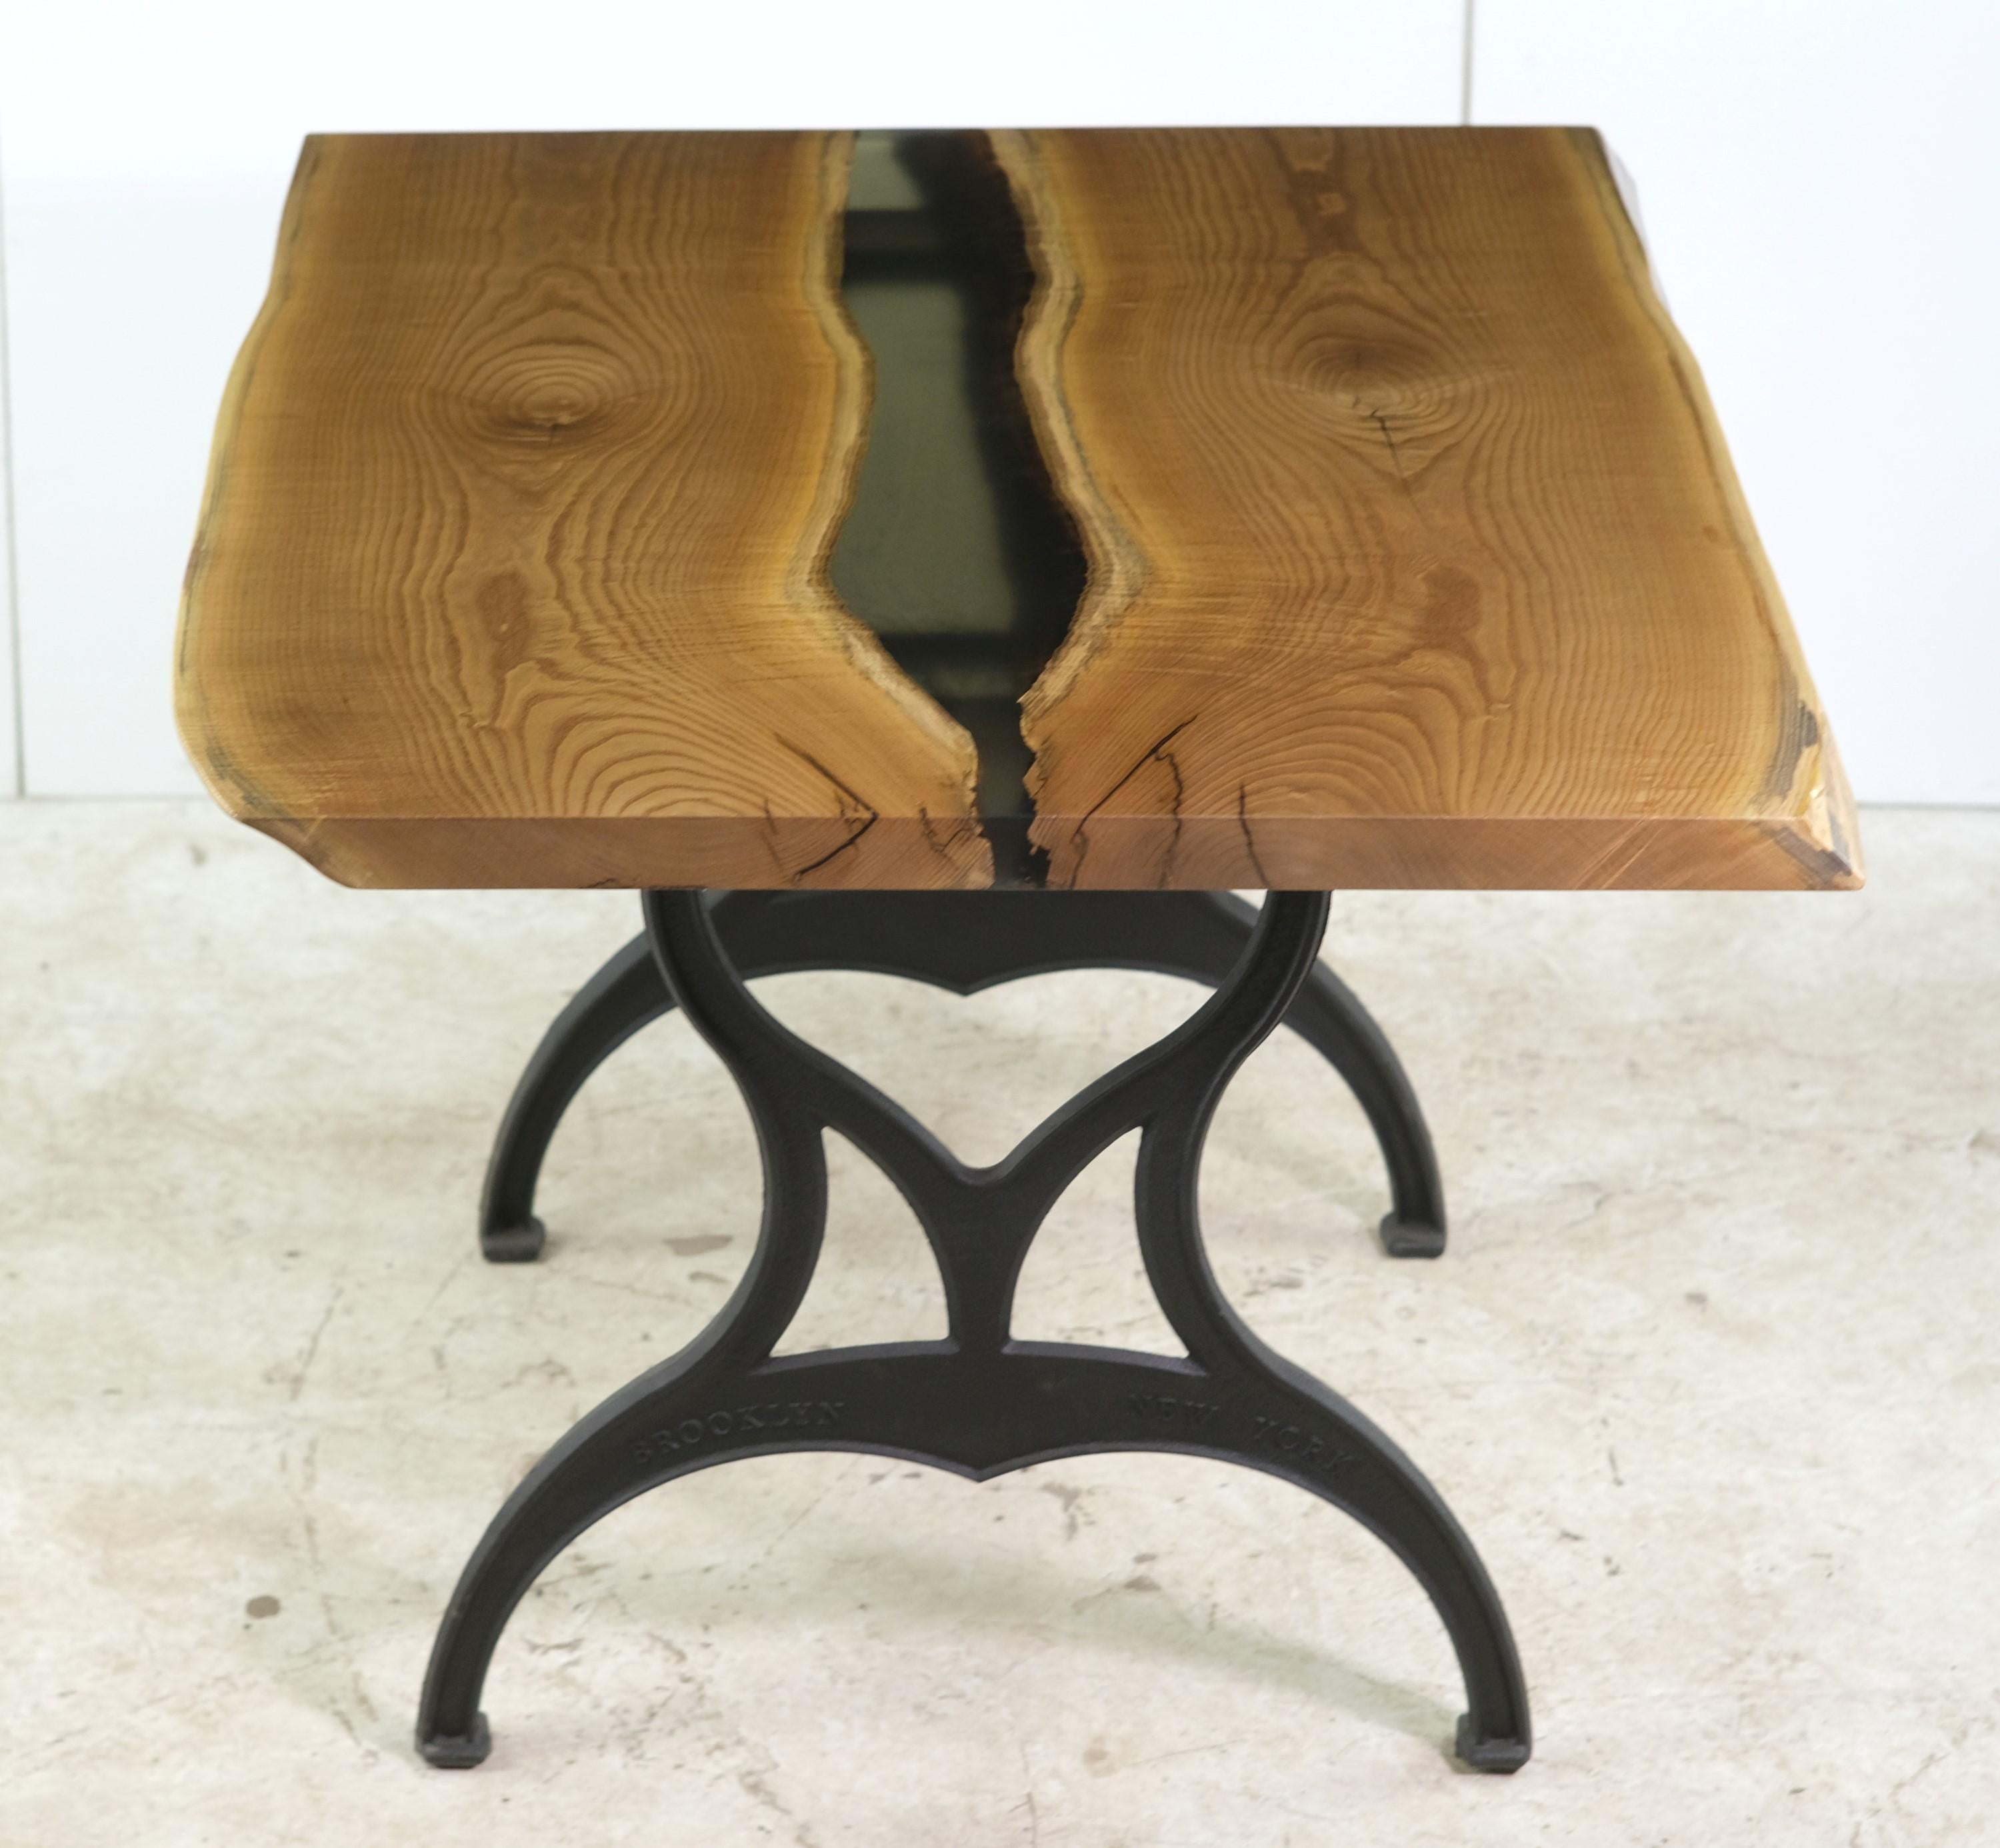 This live edge table features a two slab solid hickory top with pale green resin down the center paired with Industrial style cast iron Brooklyn legs. This table is ready to ship. Please note, this item is located in our Scranton, PA location.